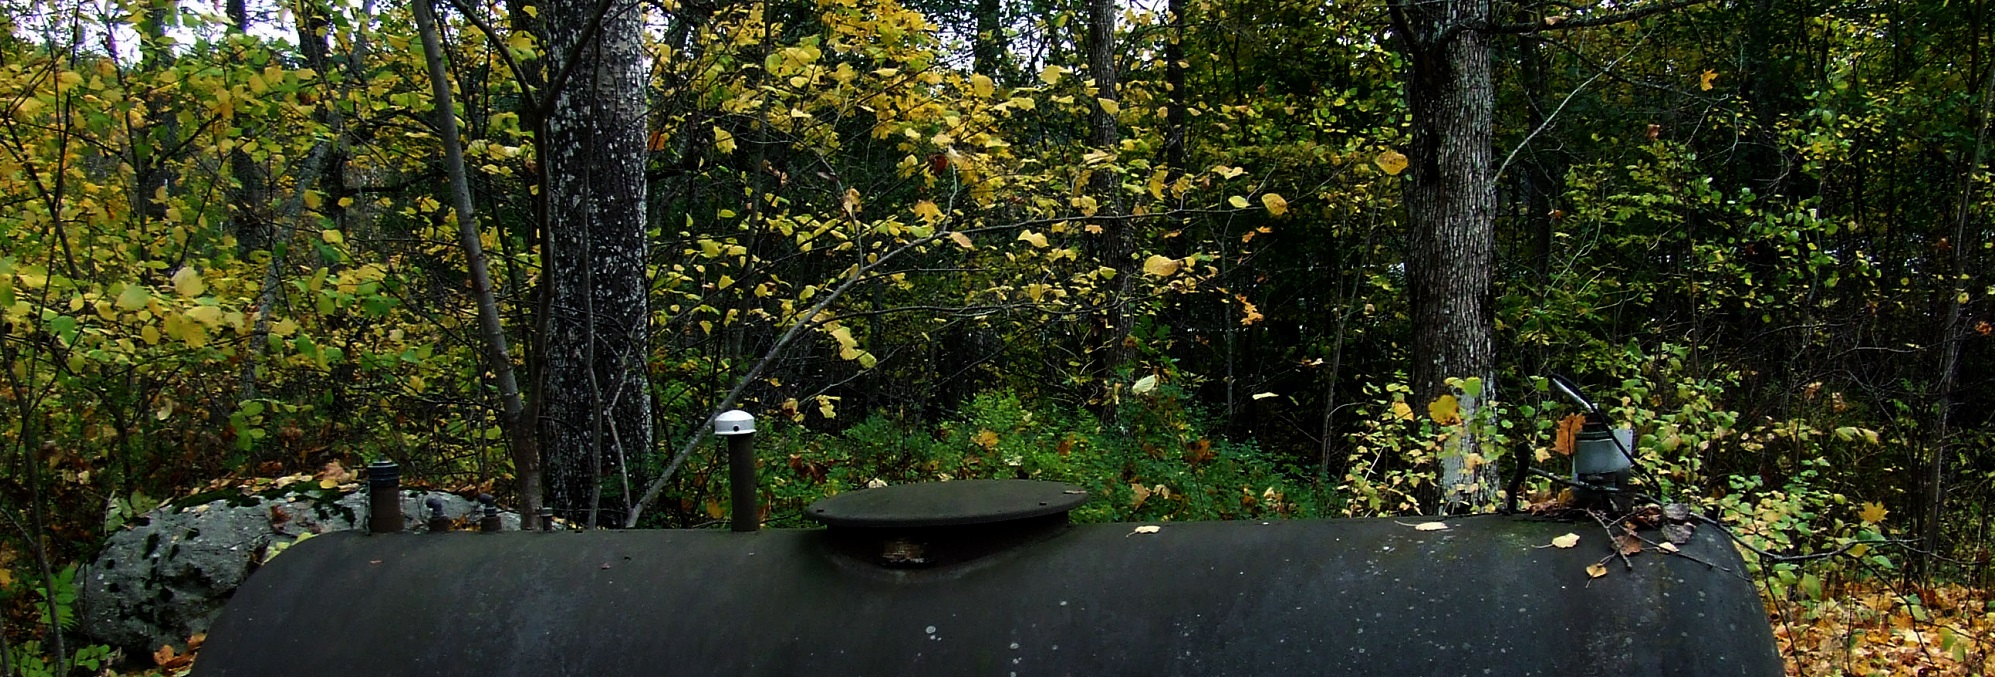 An image of the top half of a large, black oil tank.